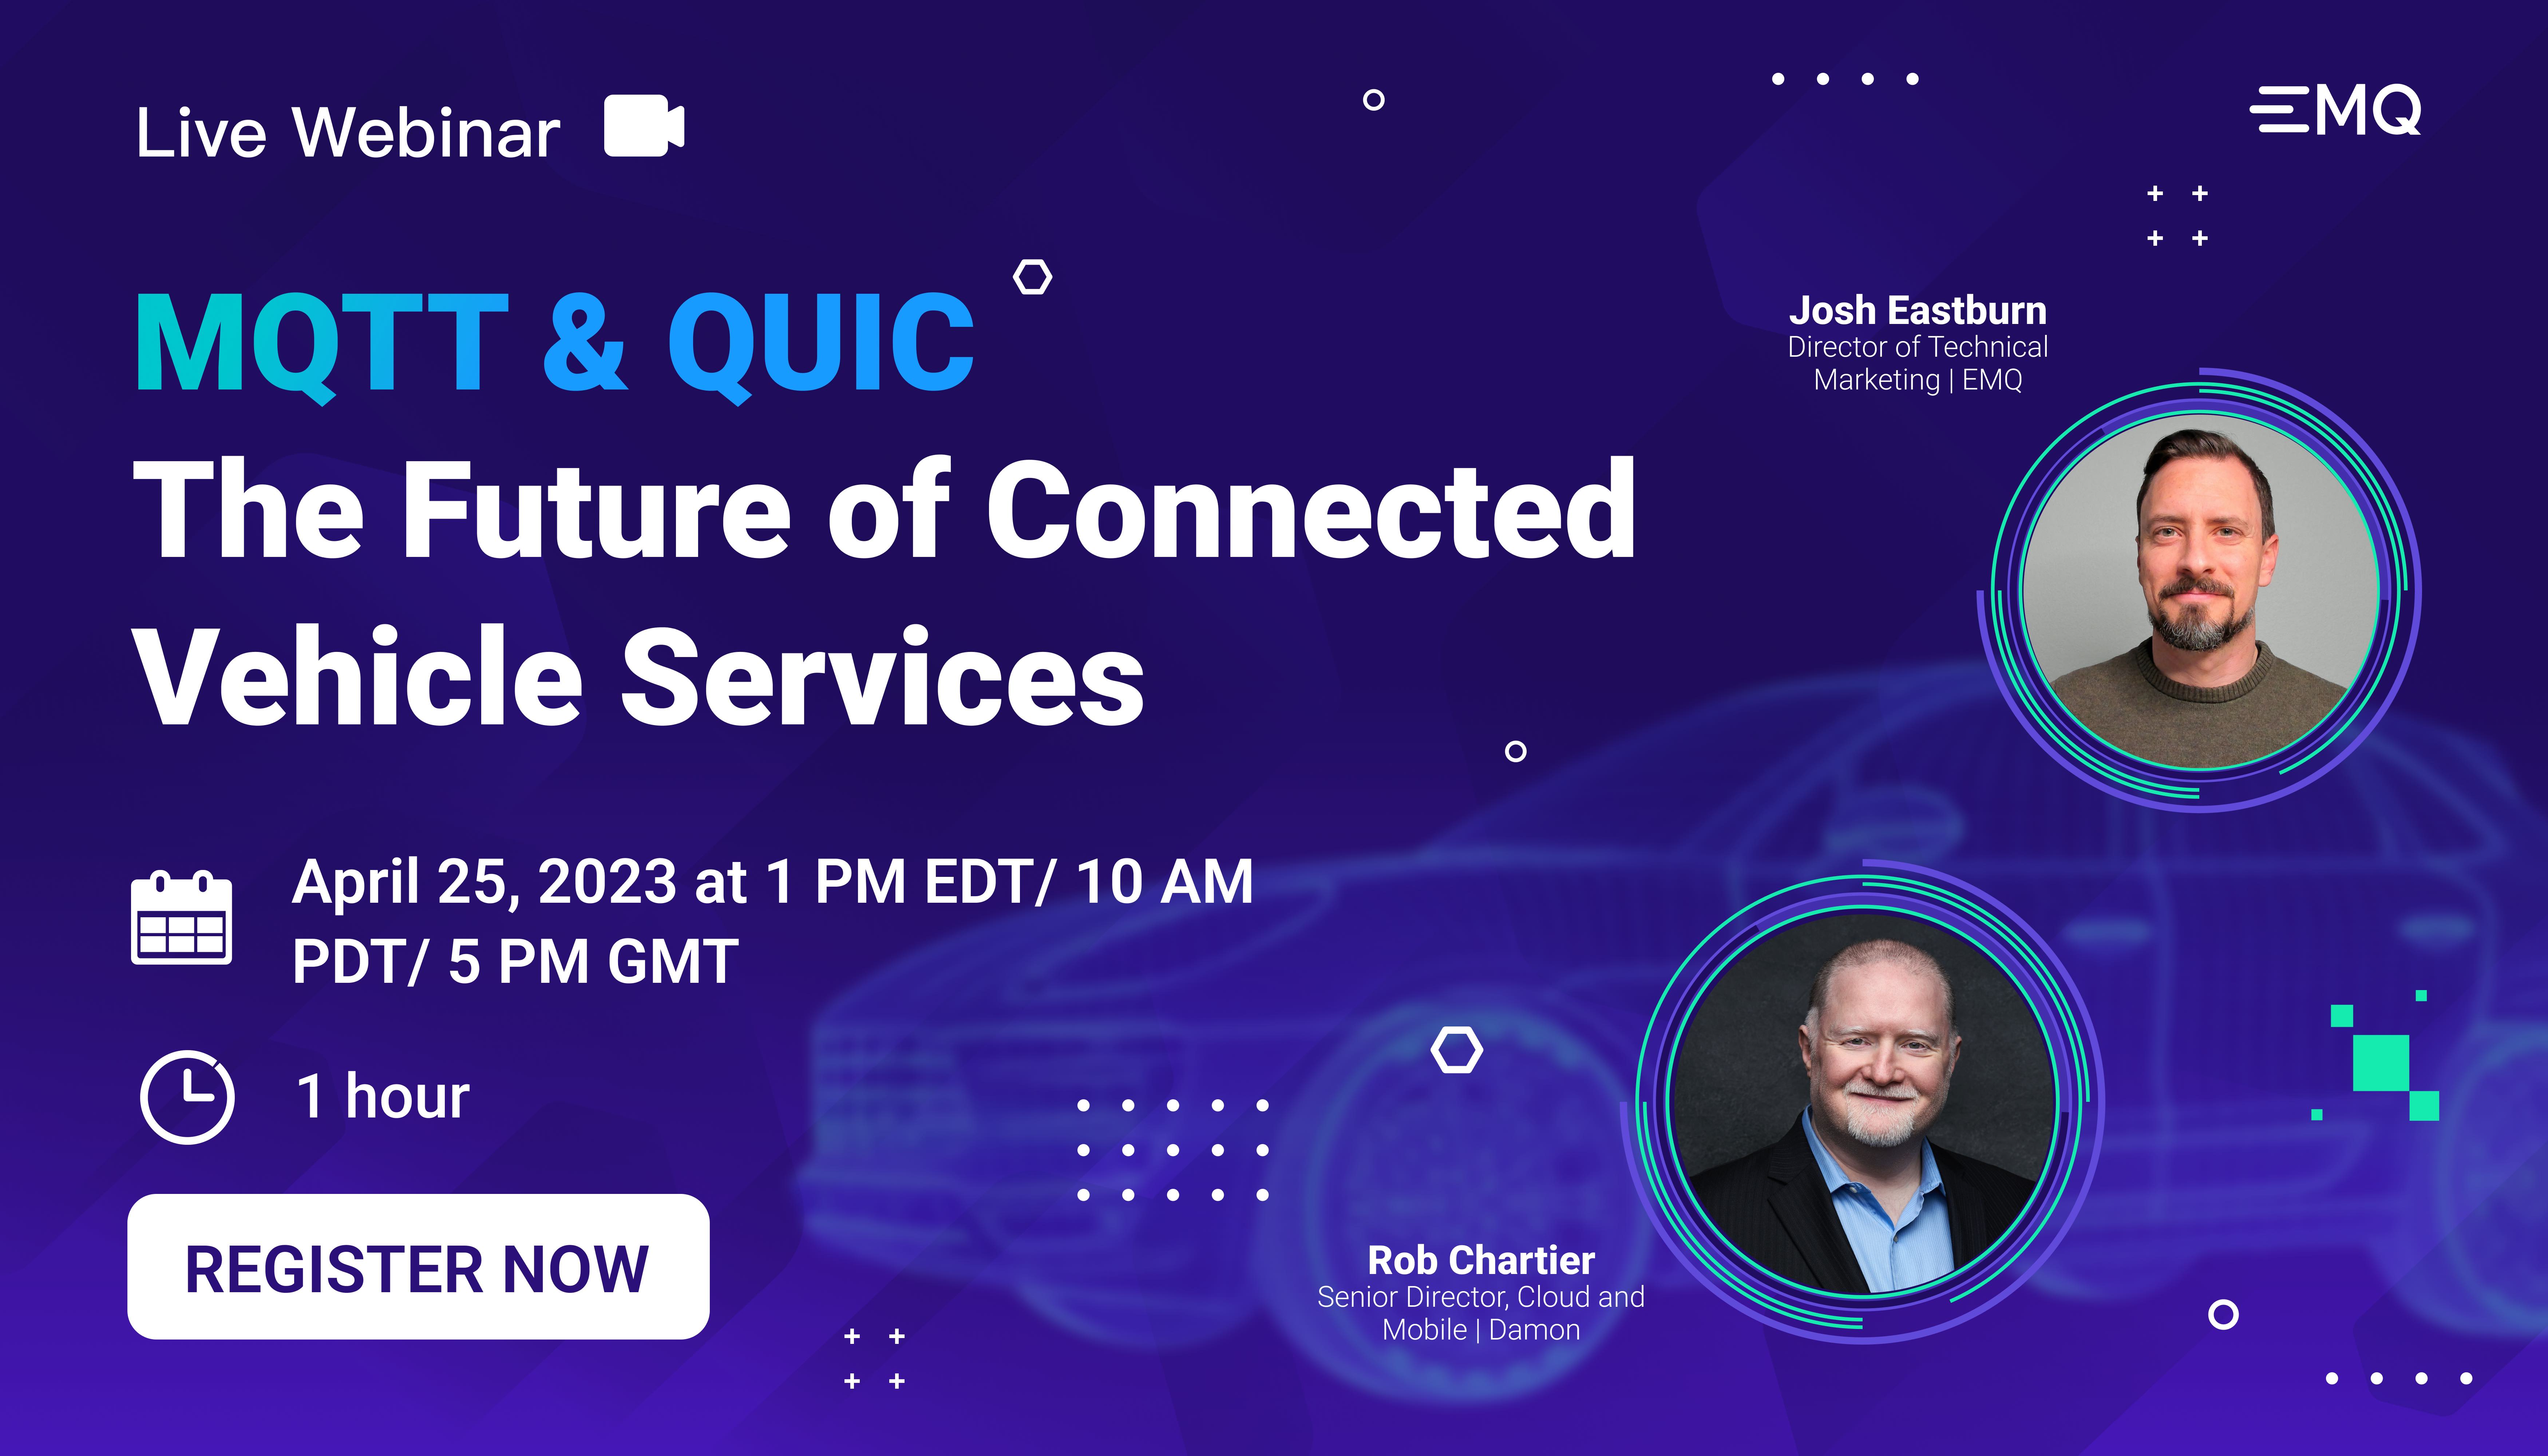 MQTT & QUIC - The Future of Connected Vehicle Services